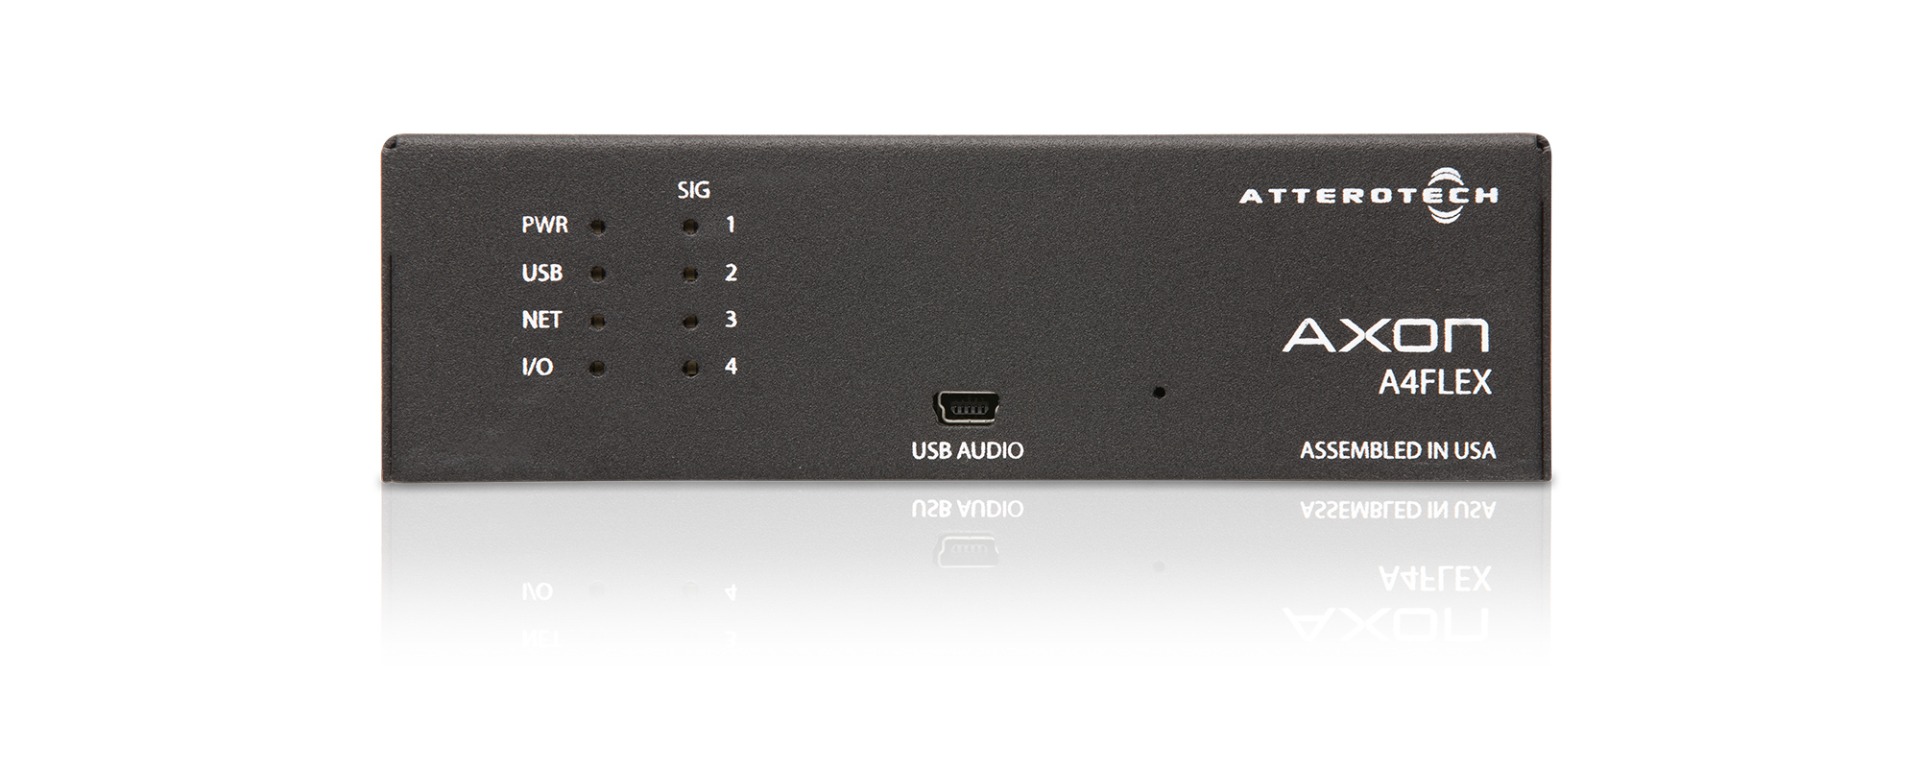 Attero Tech by QSC Axon A4FLEX -  AES67 Networked Audio Interface